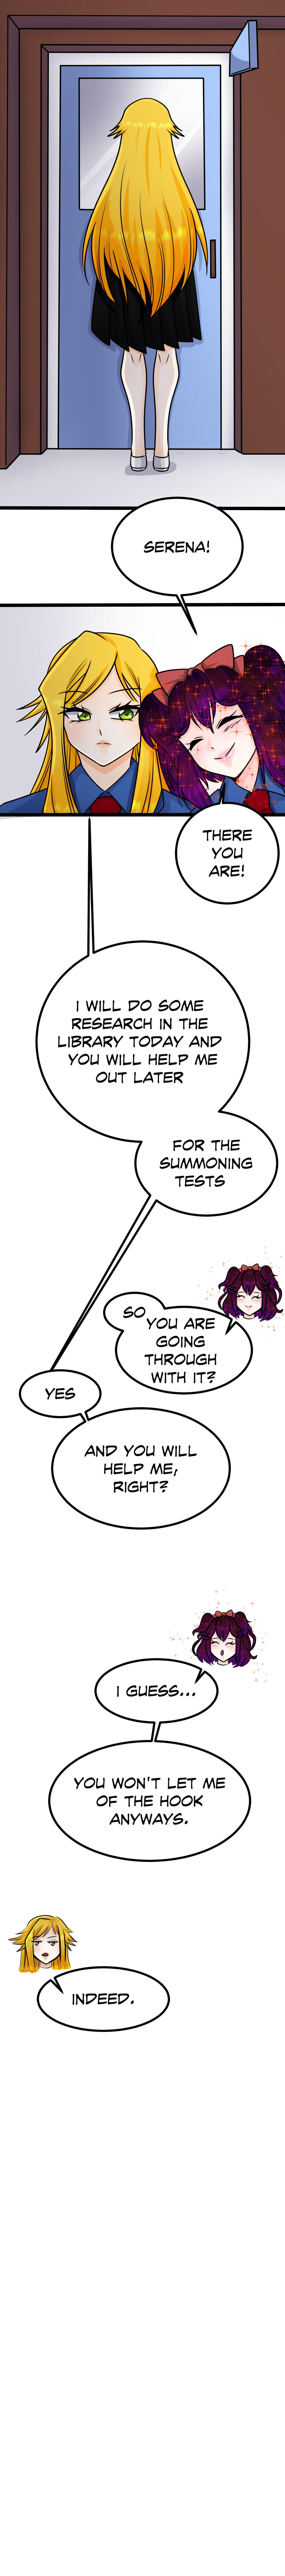 Summoning Two Demons CH1 + CH2 1